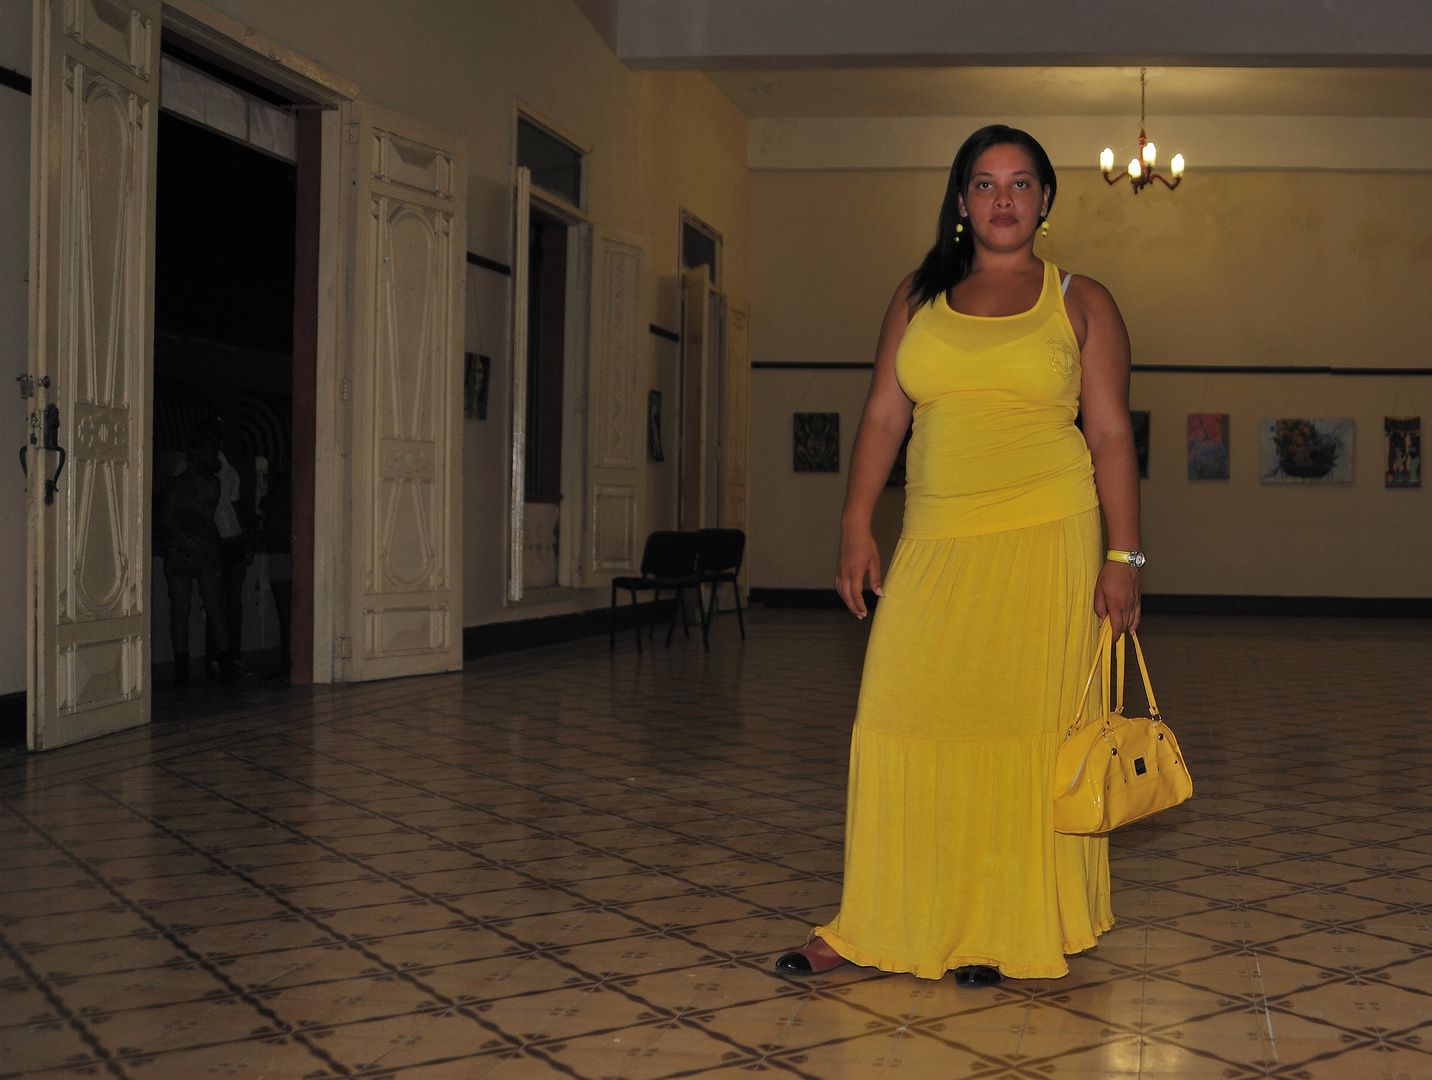 Lady in yellow